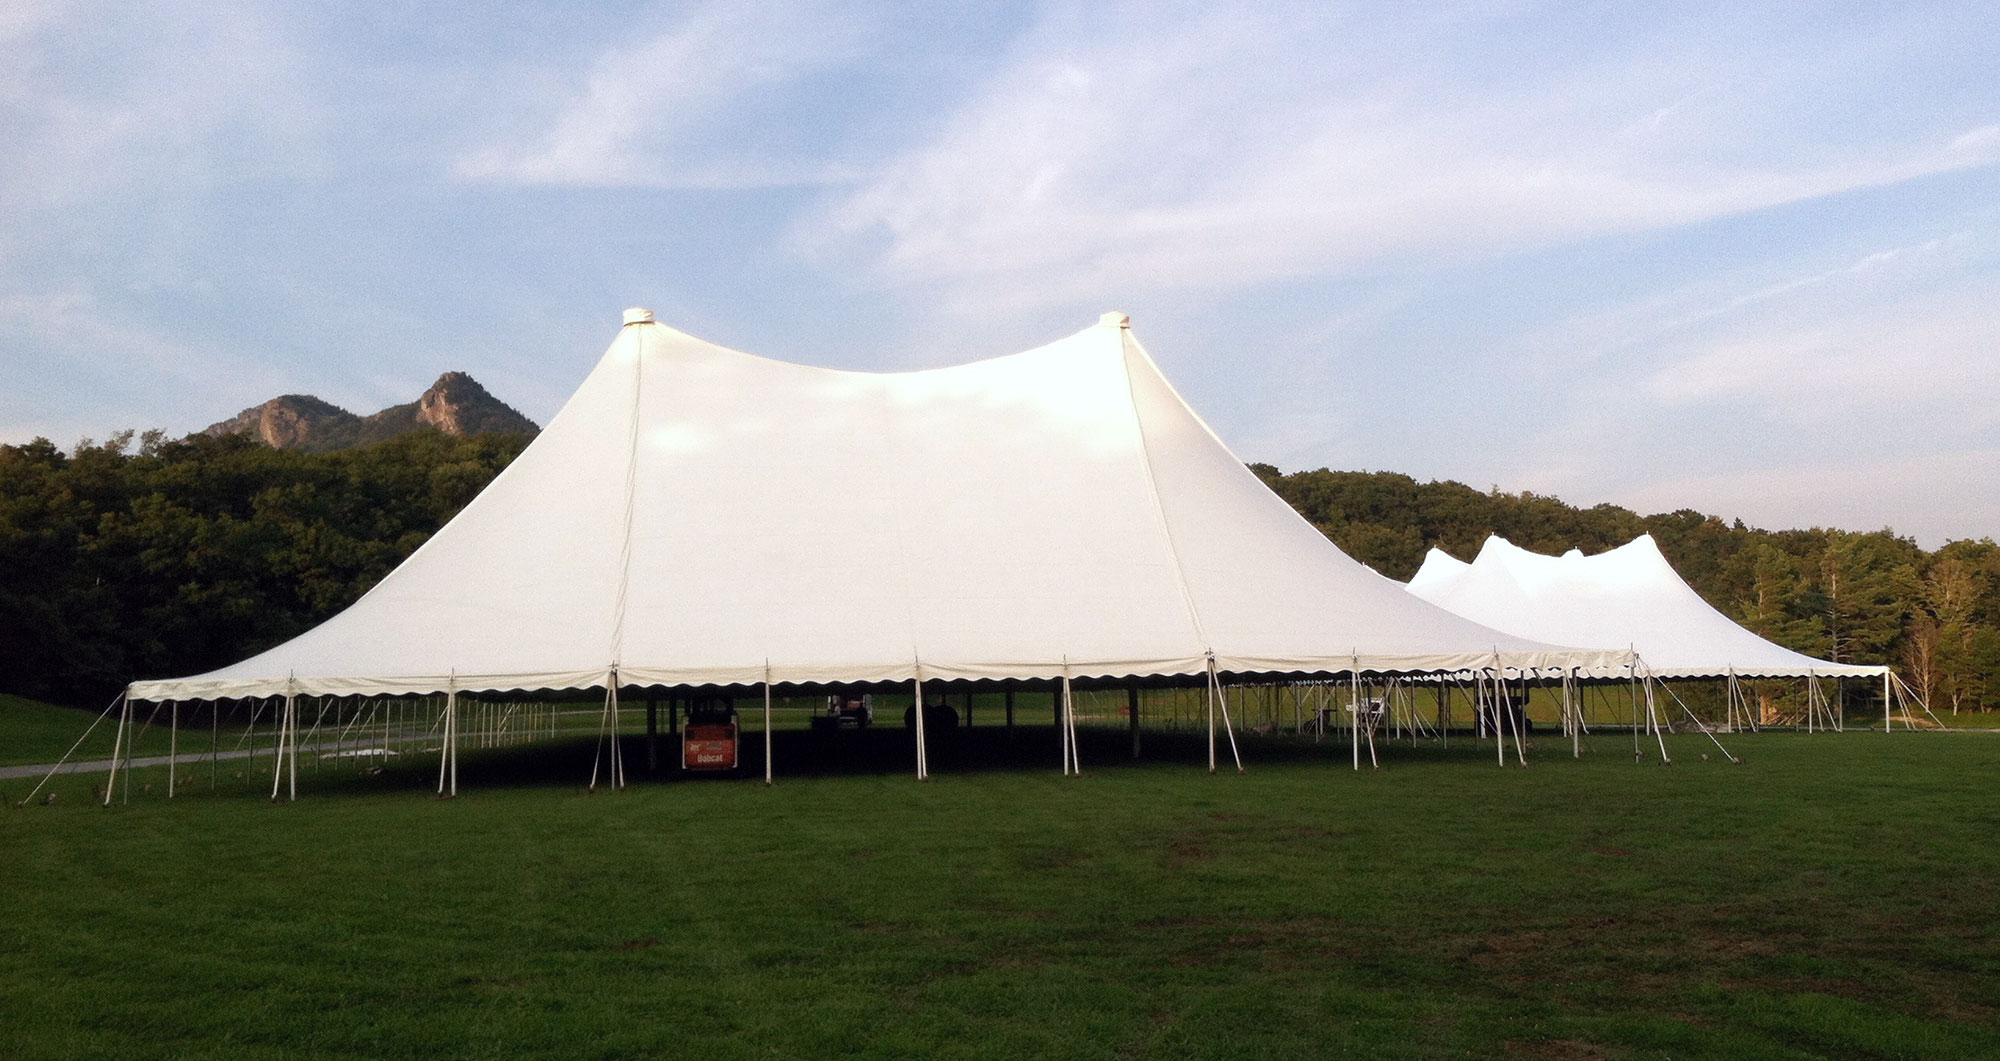 Large white awnings and tents for rent